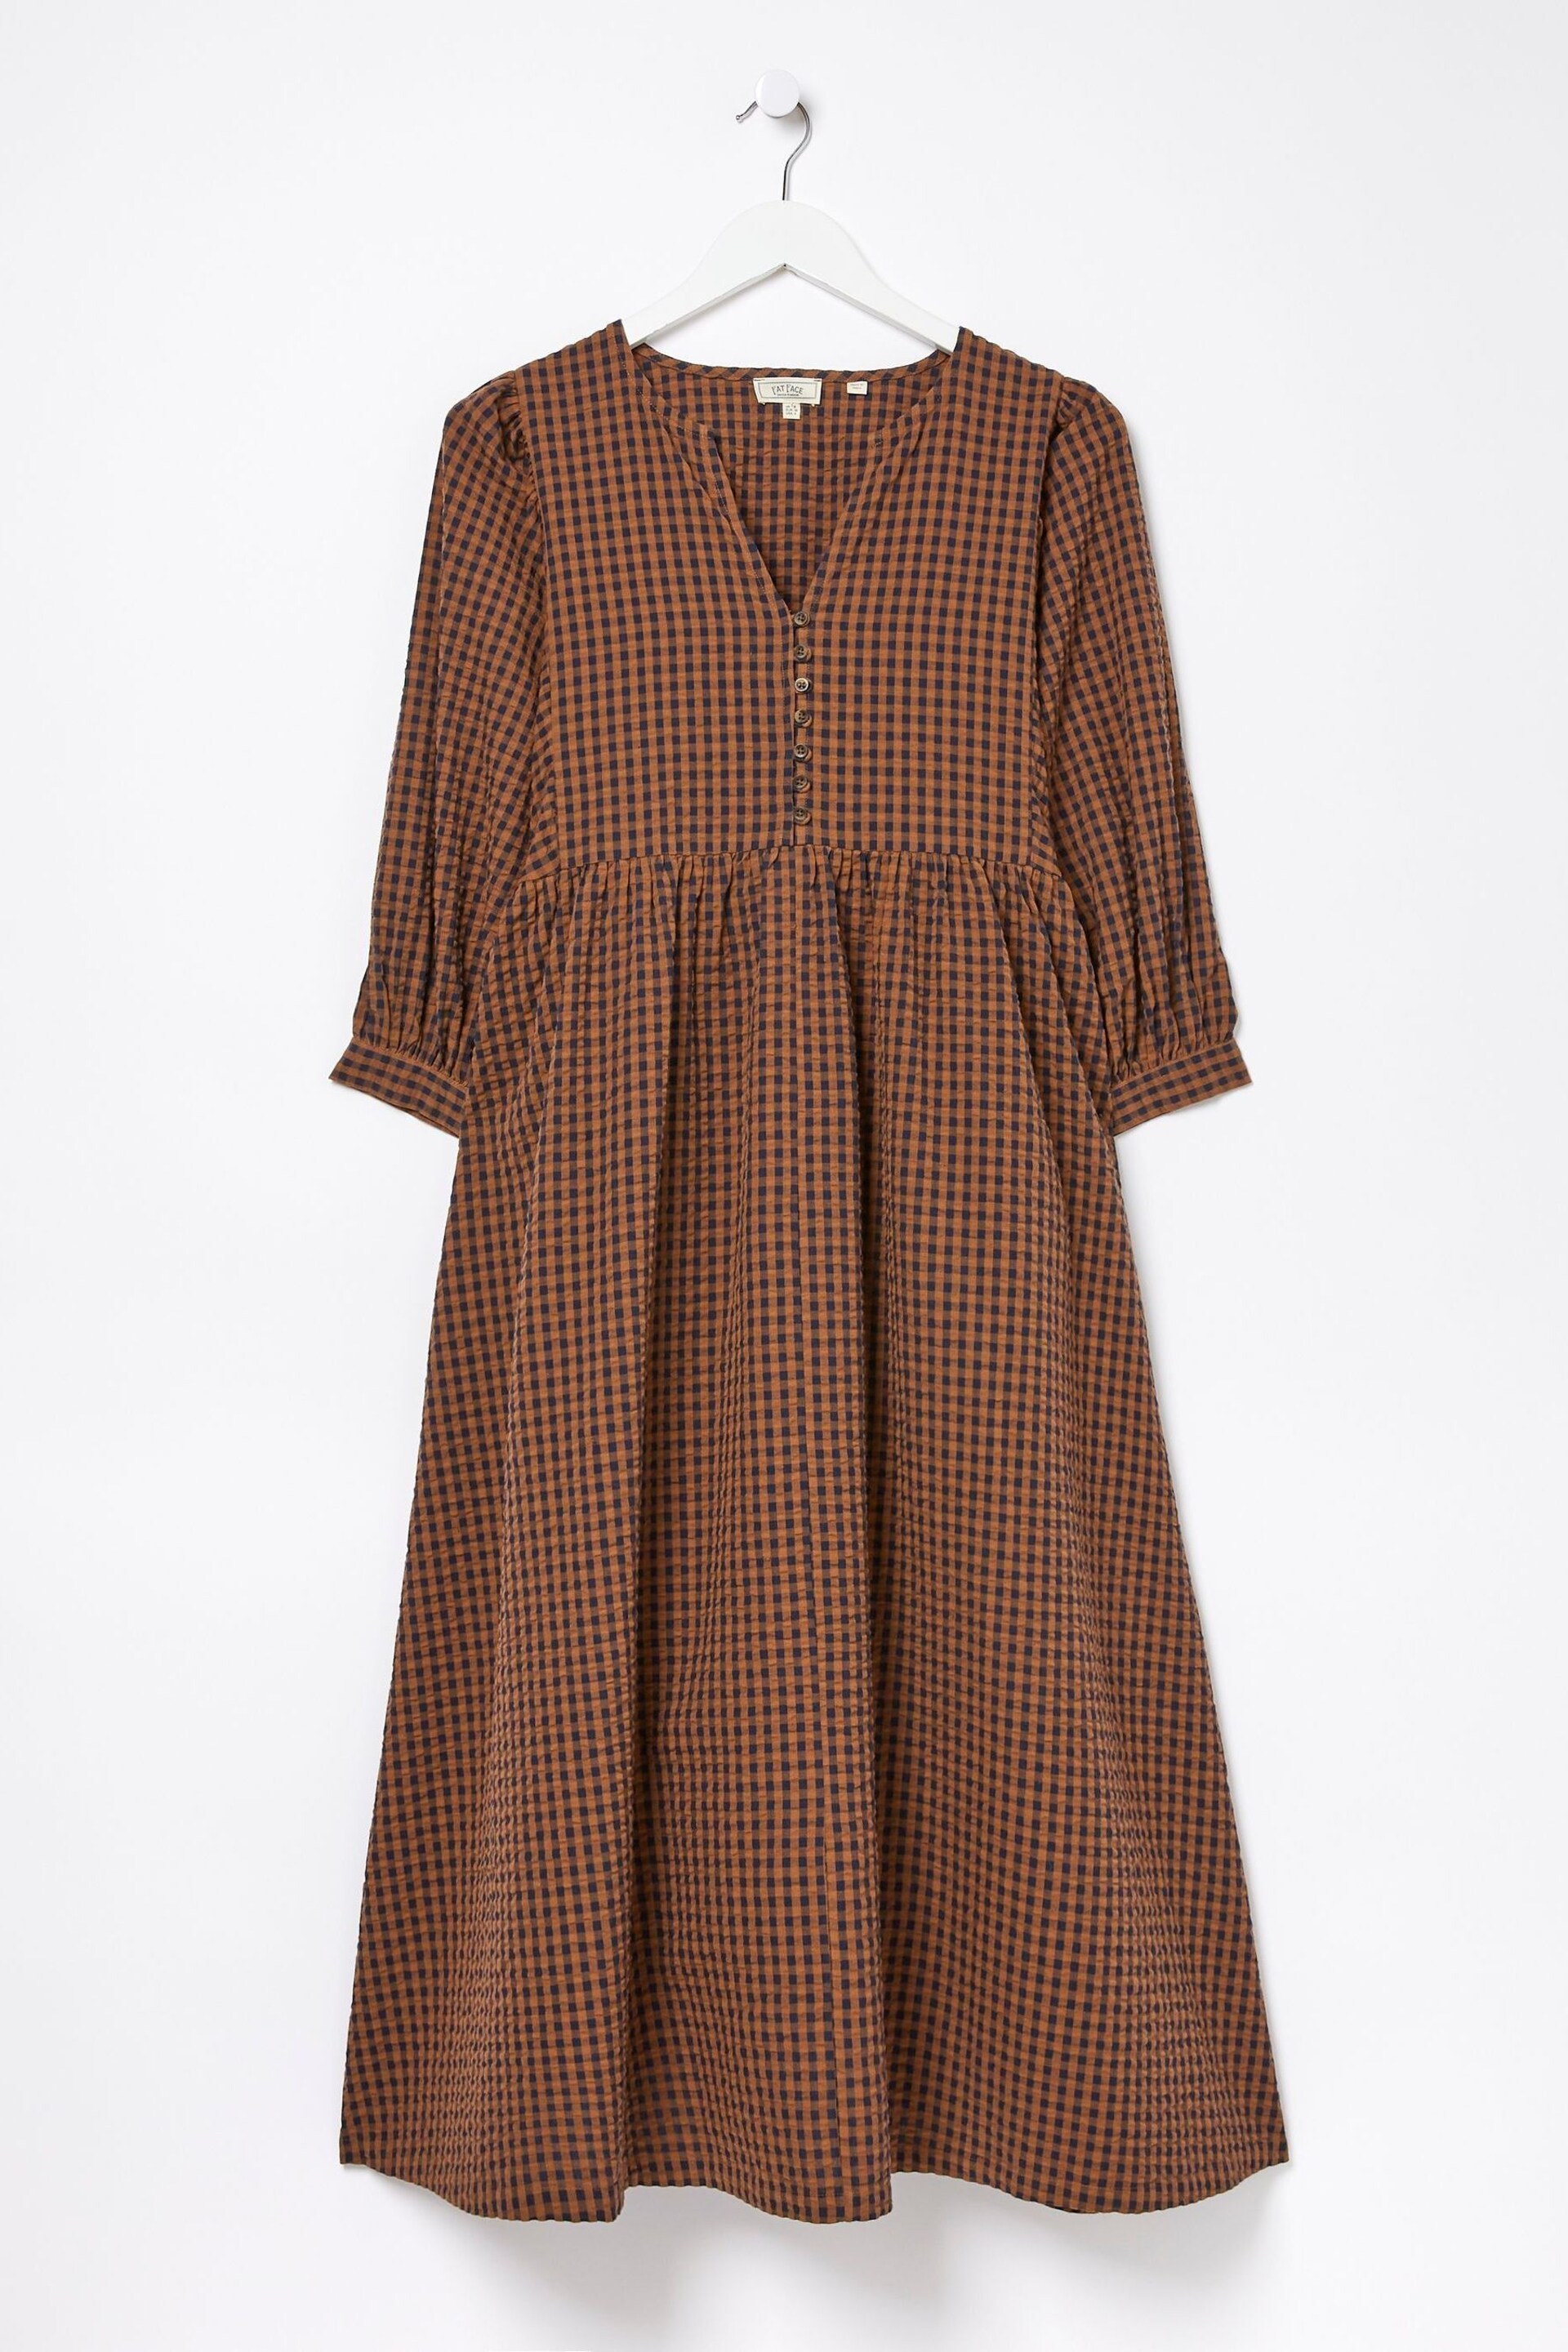 FatFace Brown Gingham Midi Dress - Image 7 of 7